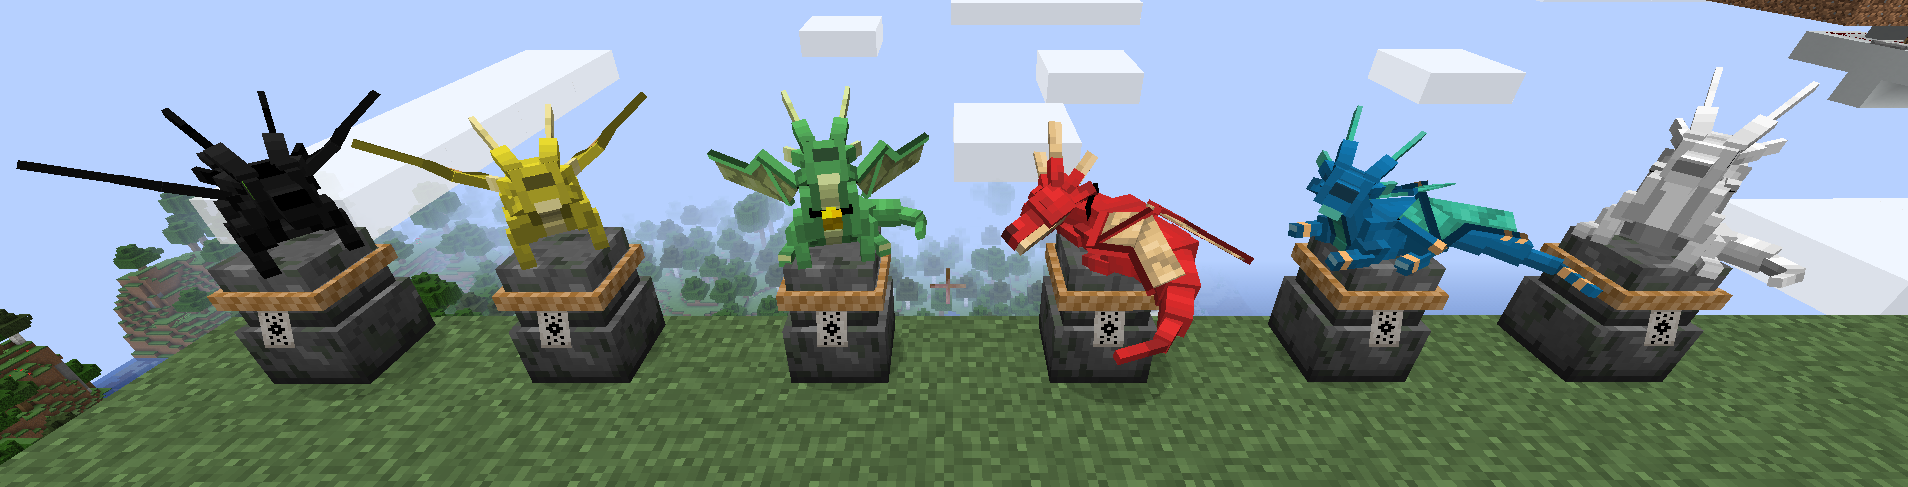 Minecraft Guardians Galore Mod For 1.17.1/1.16.5 (Animal Guards)